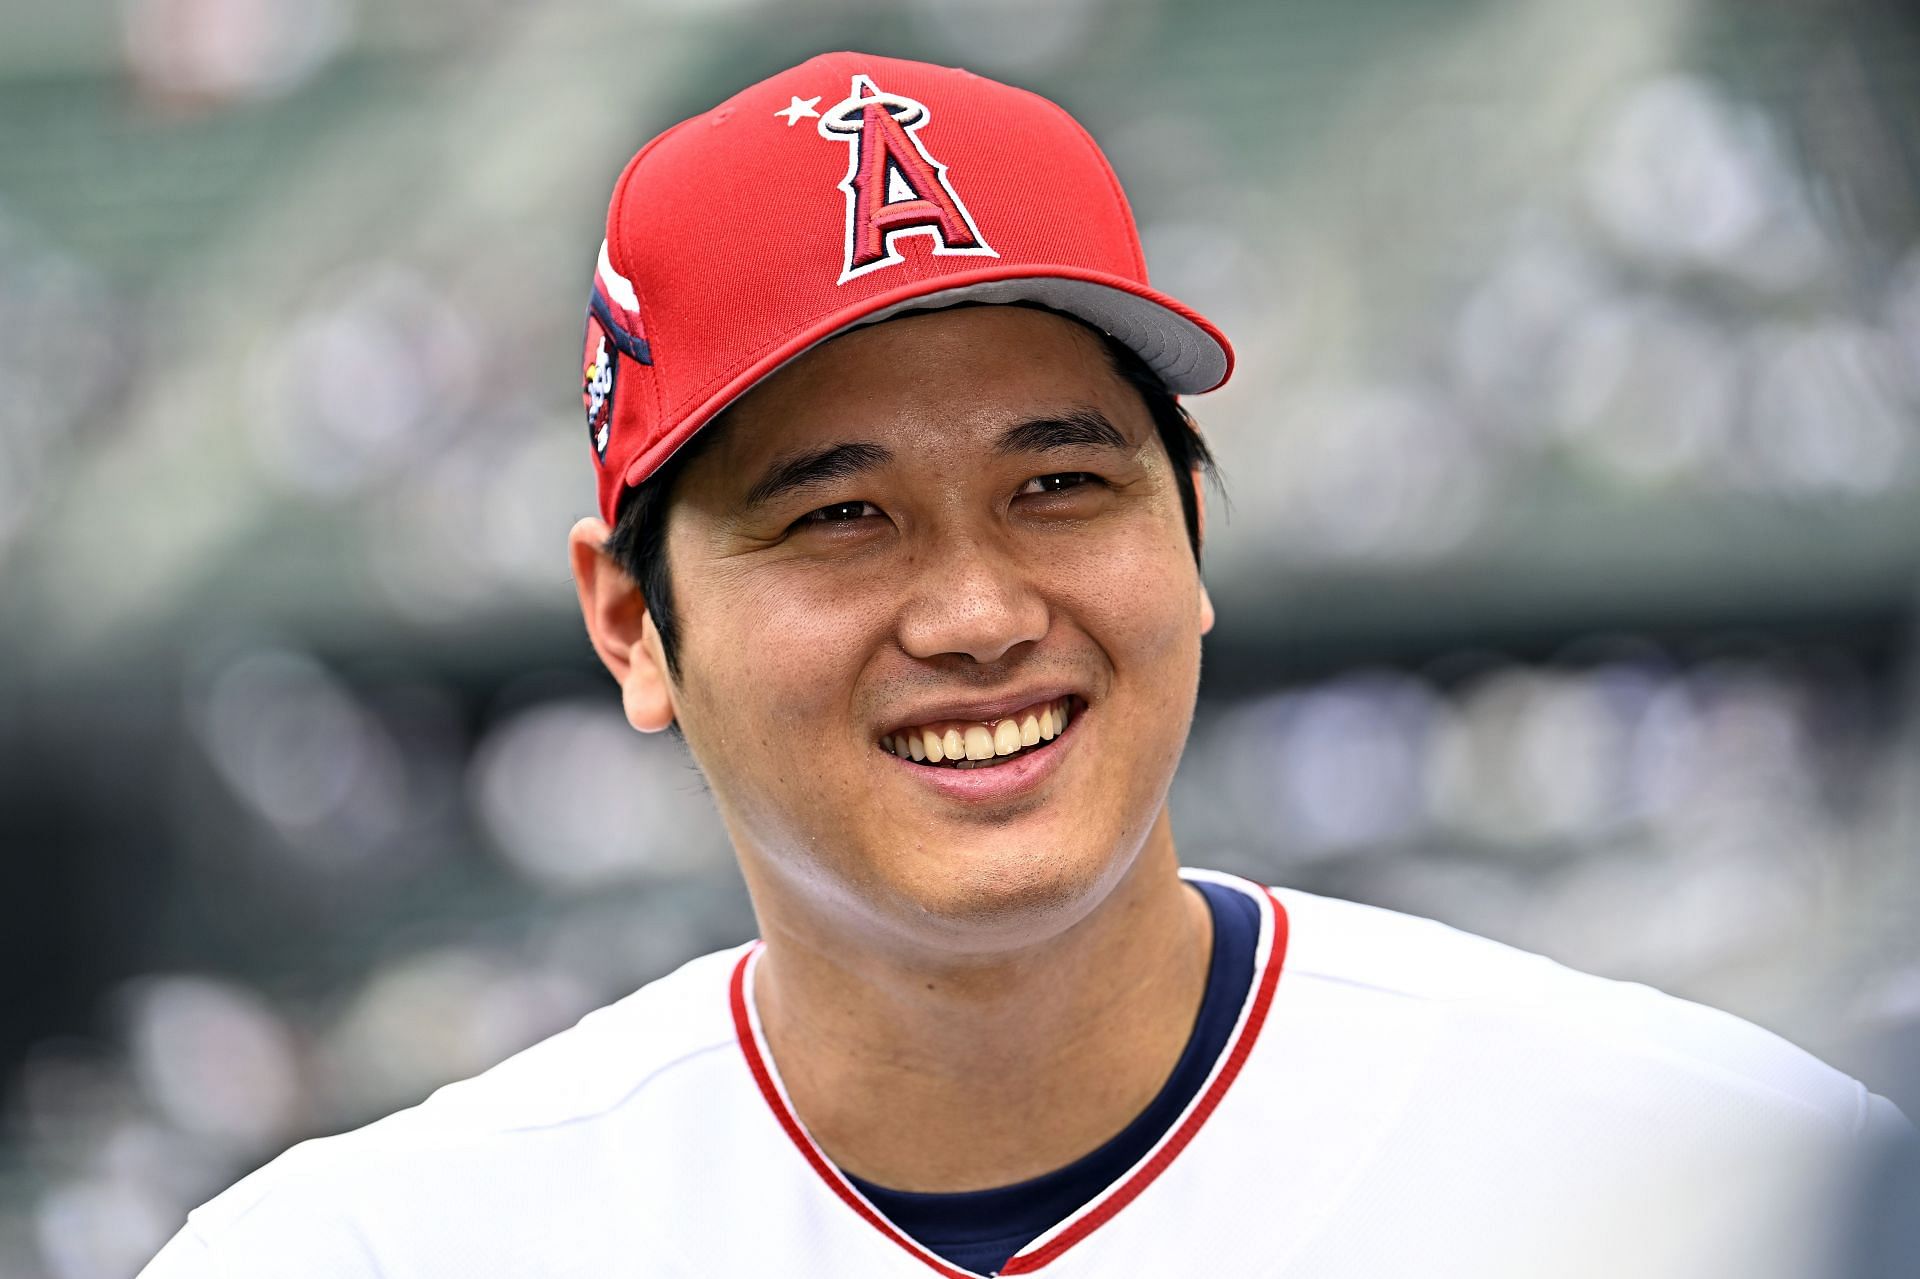 How much will Shohei Ohtani make?